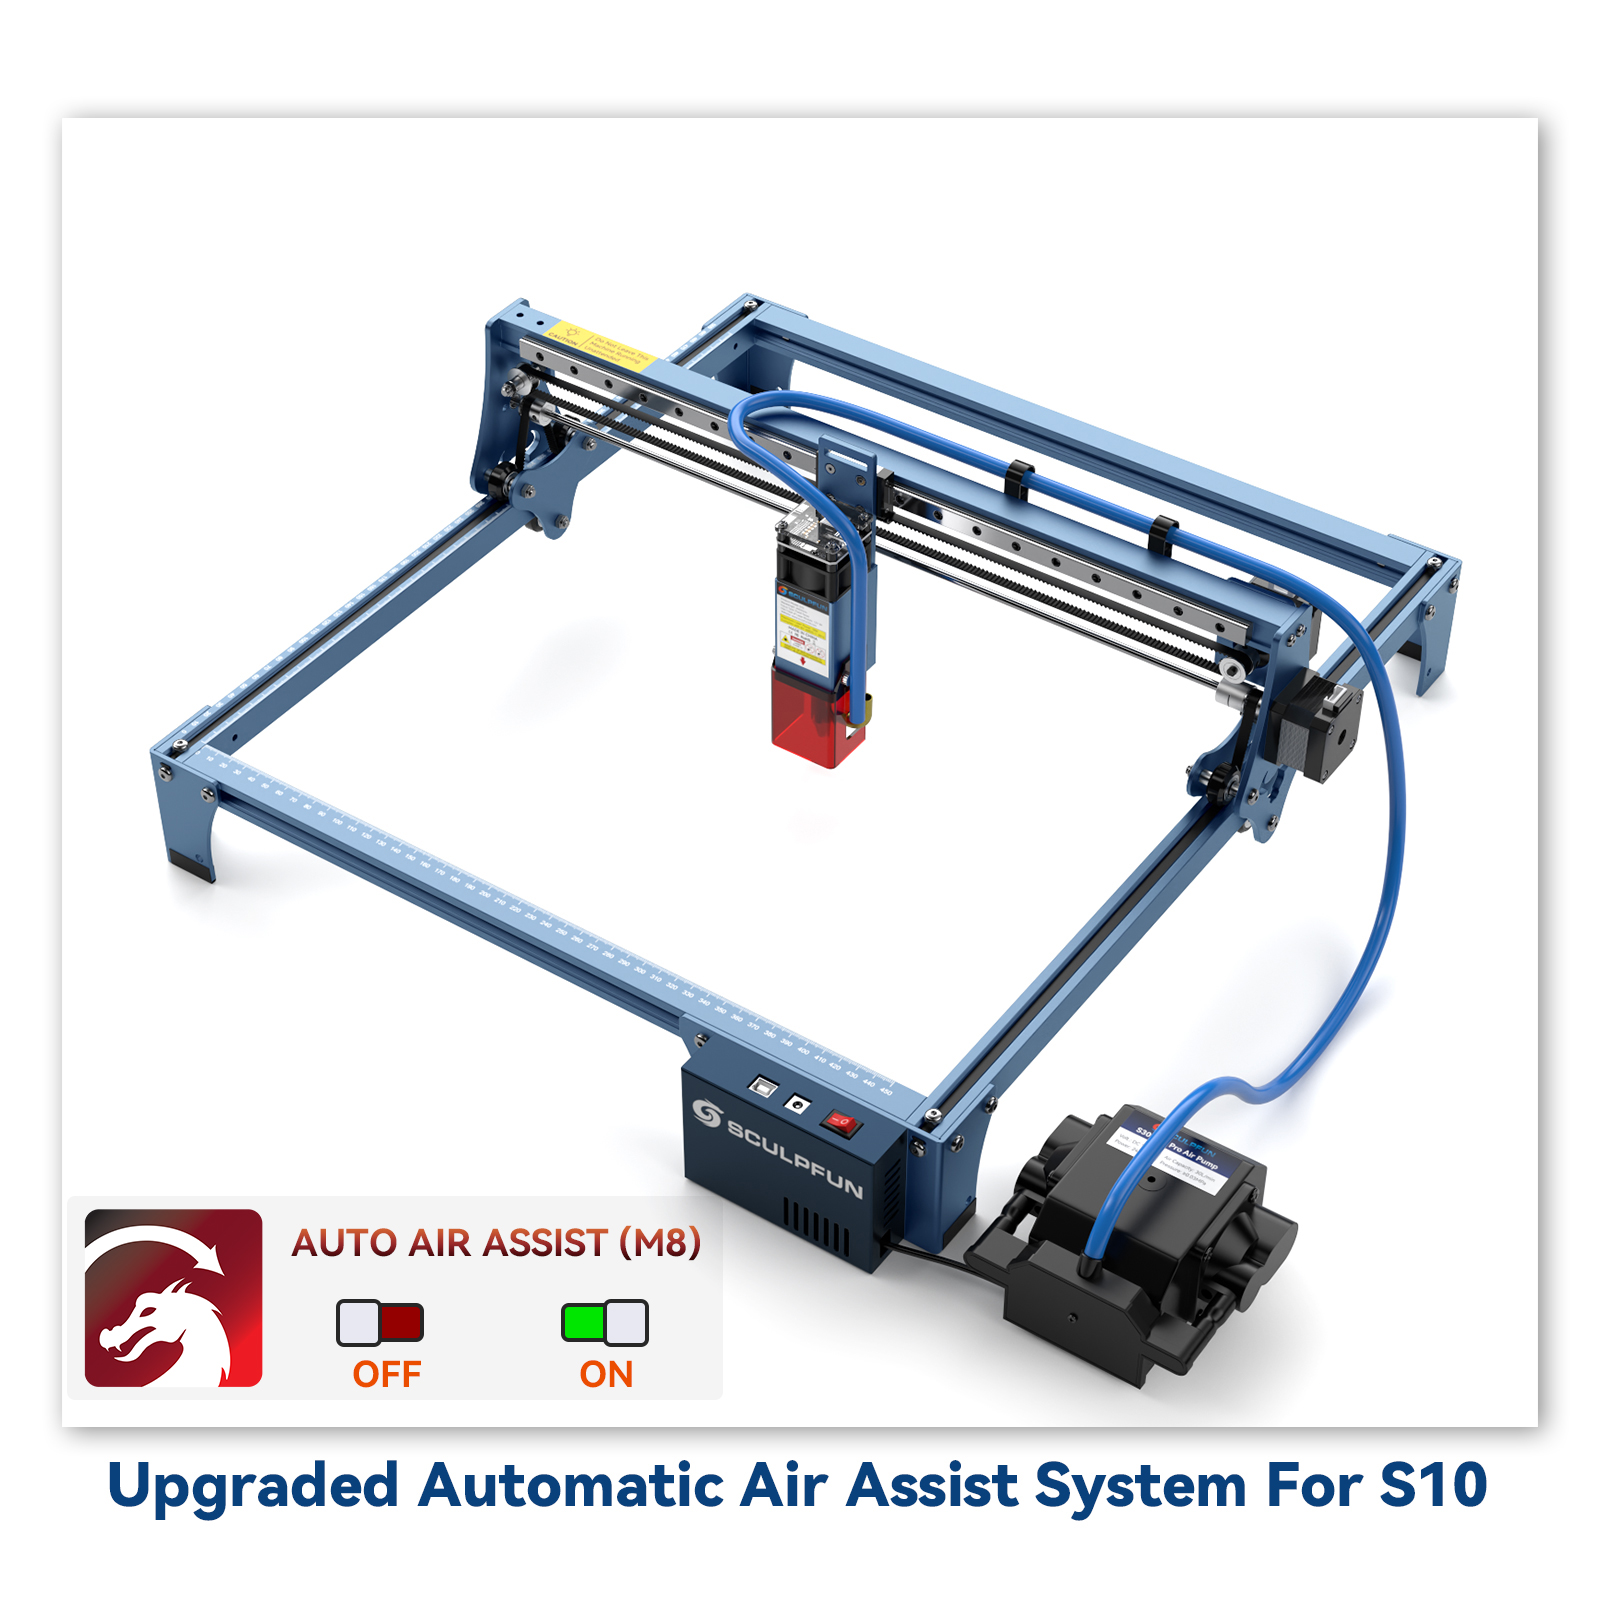 SCULPFUN Automatic Air Assist Kit 12V Version   Suitable for upgrading S9/S10 to S30 automatic air assist system, including 32bit automatic air assist mainboard, 30min/min automatic air pump, 12V/7A adapter, installation kit